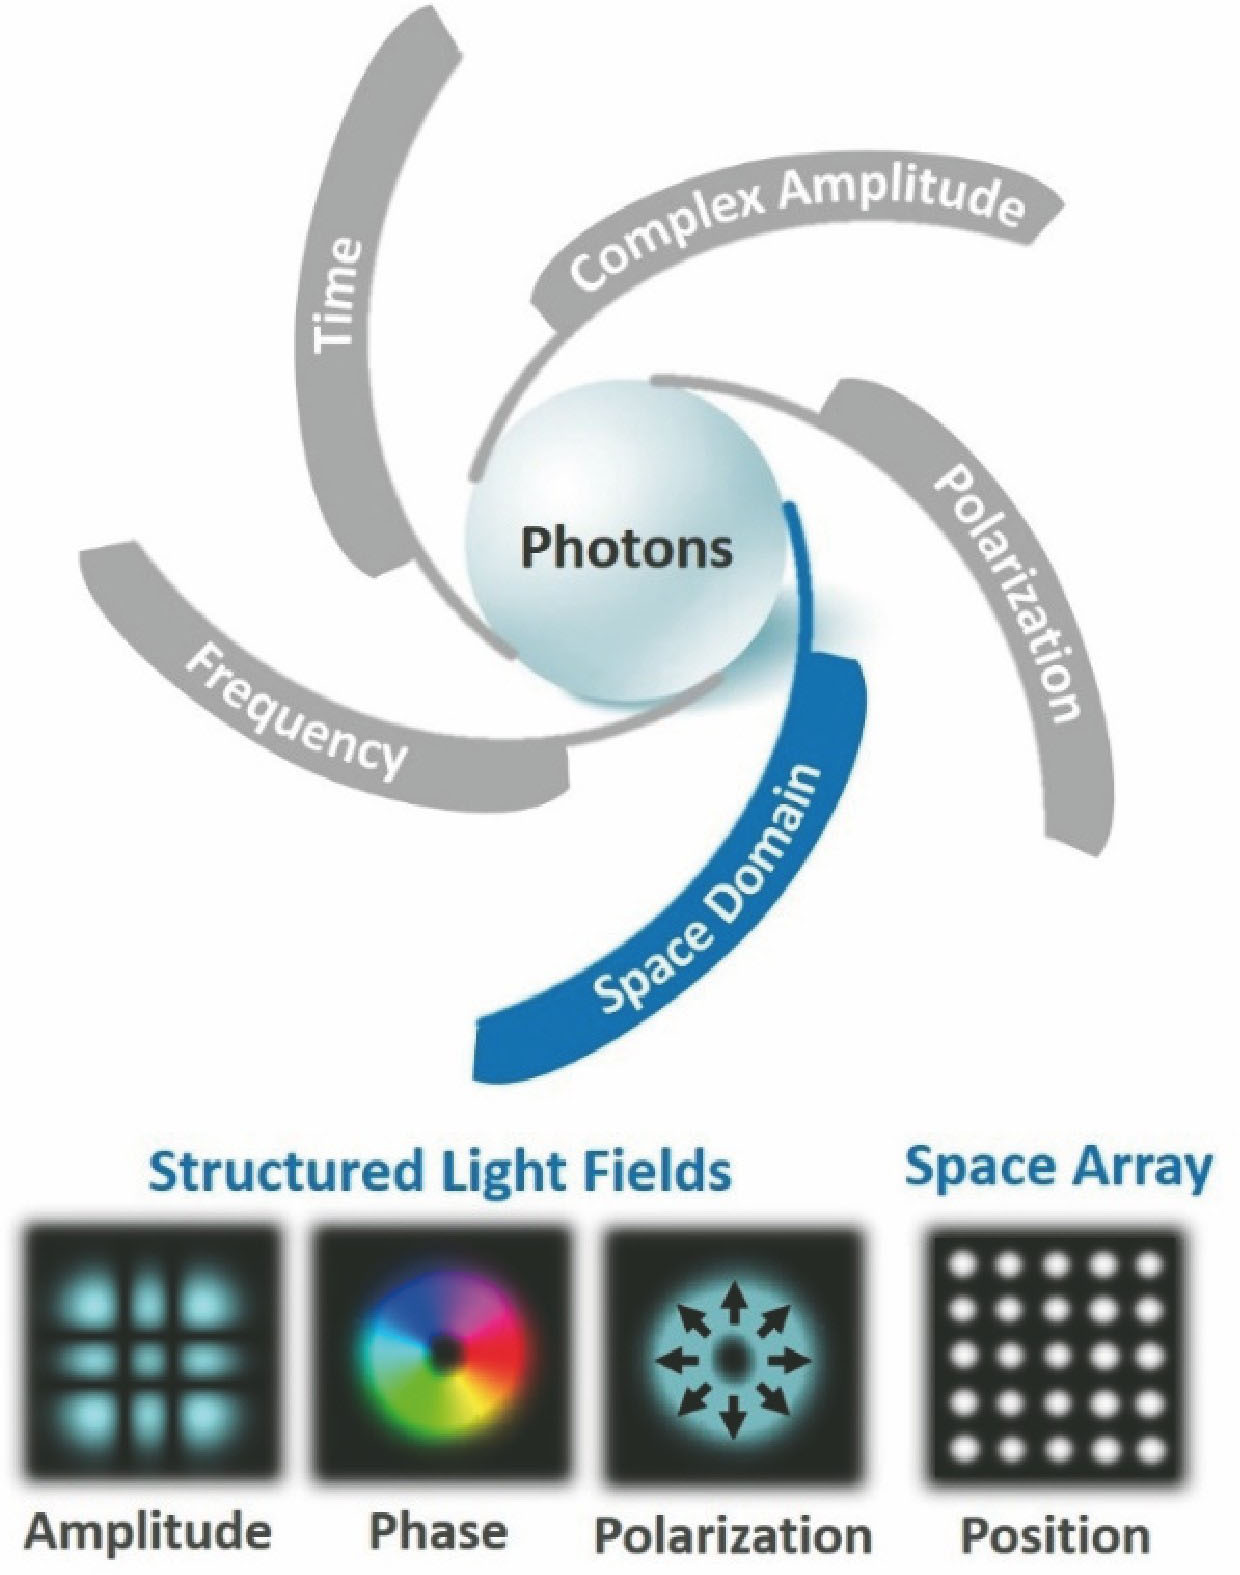 Schematic illustration of physical dimension resources of photons (wavelength/frequency, time, complex amplitude, polarization, space domain) and manipulating the space domain of lightwaves for structured light field (spatial amplitude, spatial phase, spatial polarization) and space array (spatial position)